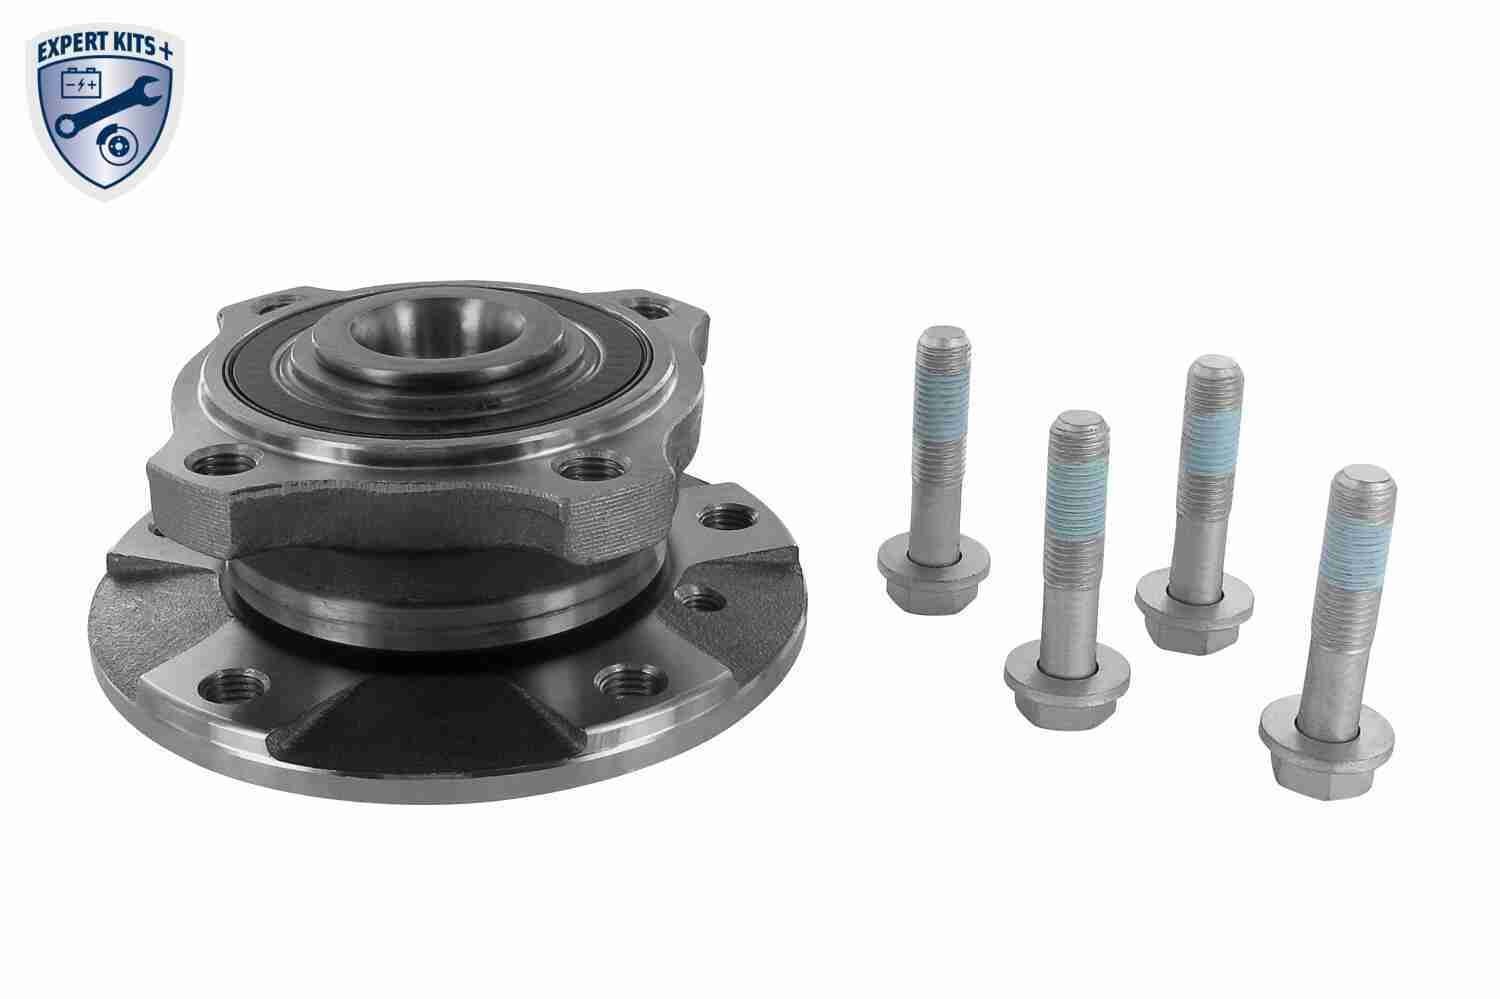 V20-0682 VAICO Wheel bearings BMW Front Axle, EXPERT KITS +, with bolts/screws, 143 mm